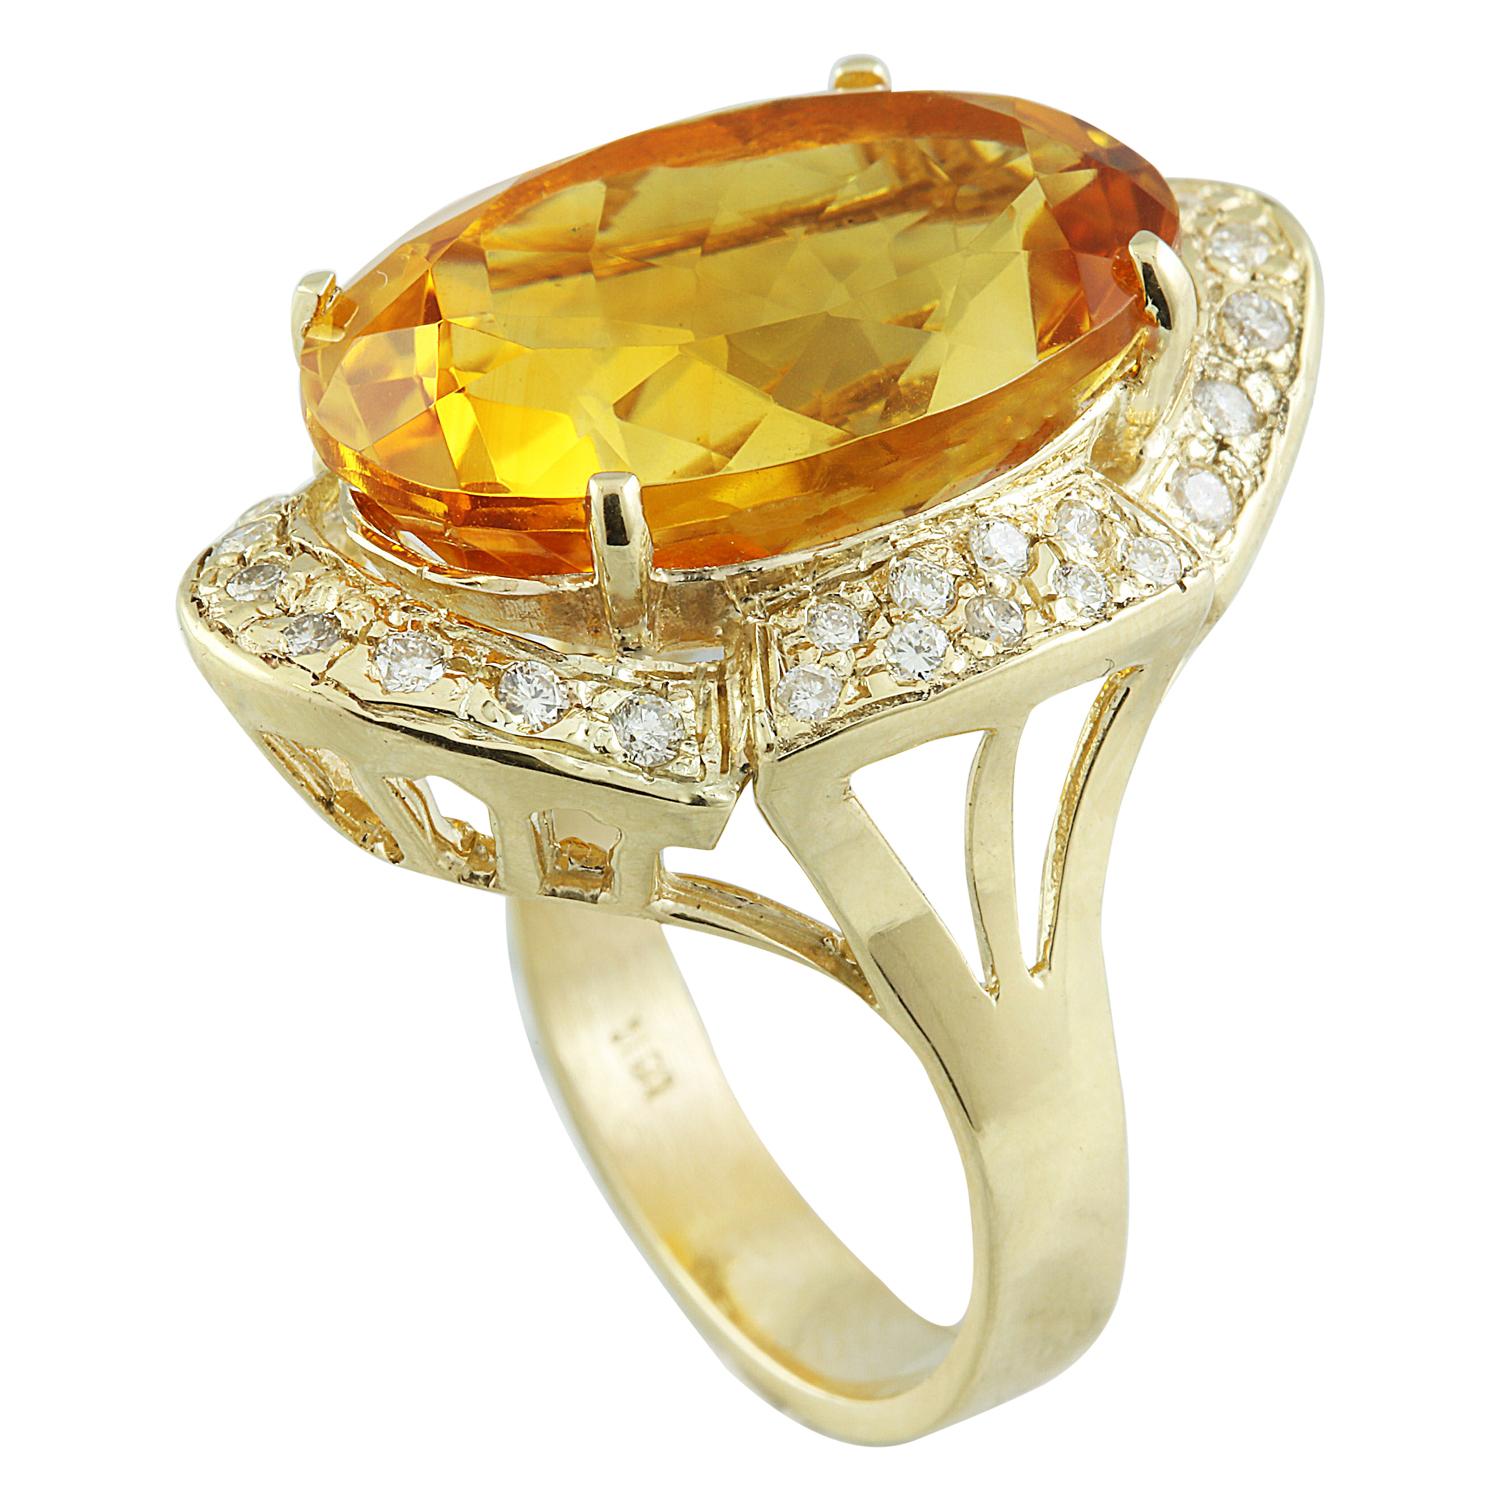 Oval Cut Citrine Diamond Ring In 14 Karat Yellow Gold For Sale